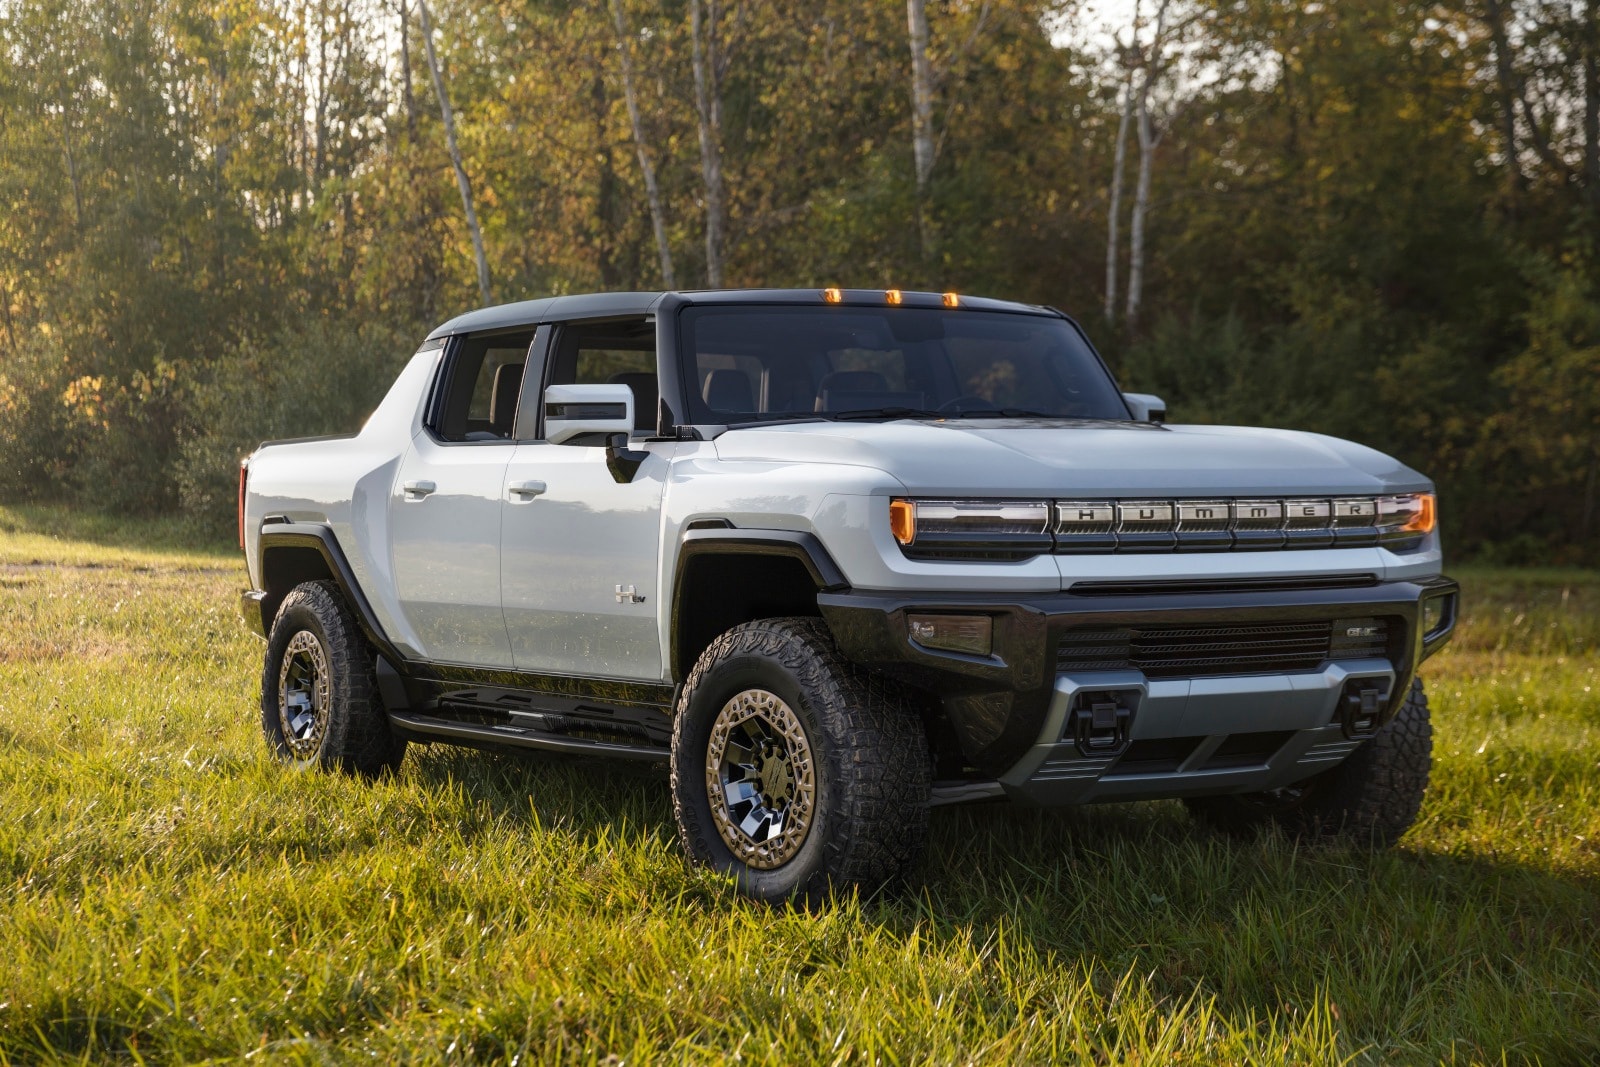 2022 GMC Hummer EV Weight, Range and Battery Size Revealed